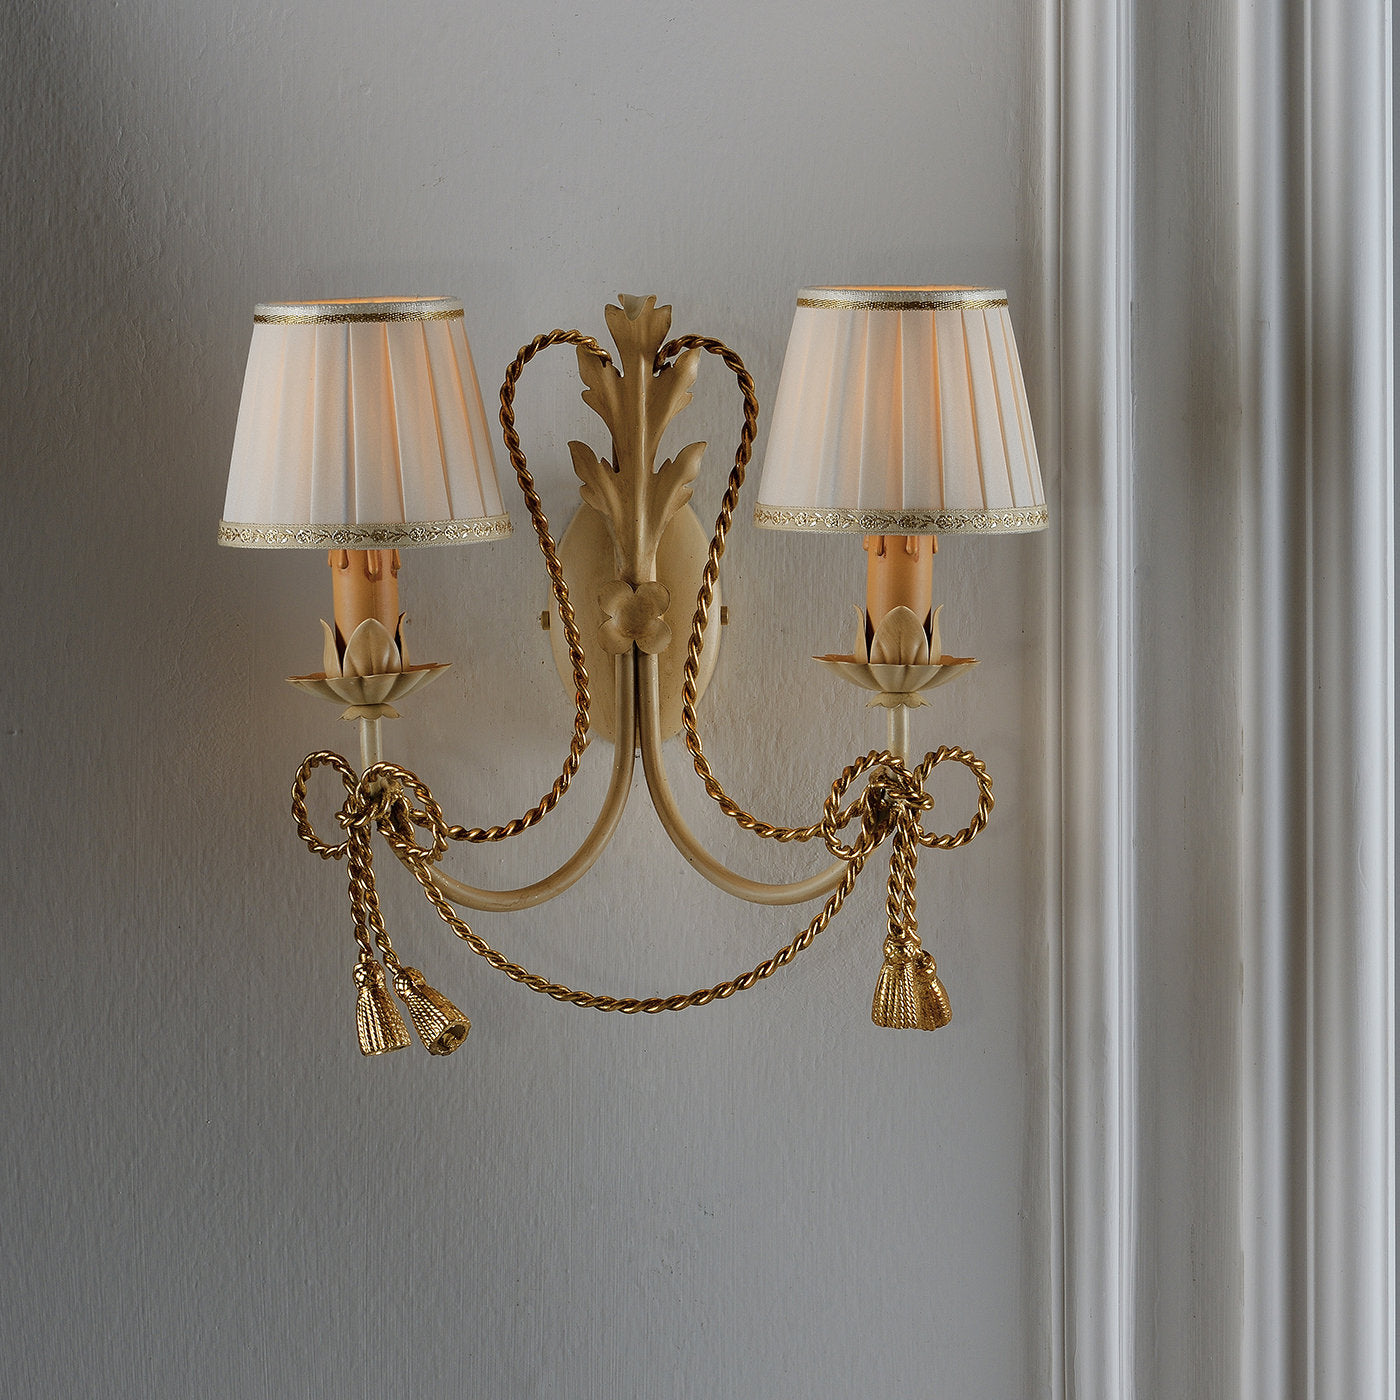 1341 Double Gold Cord Metal Sconce Light Fixture  - Alternative view 1